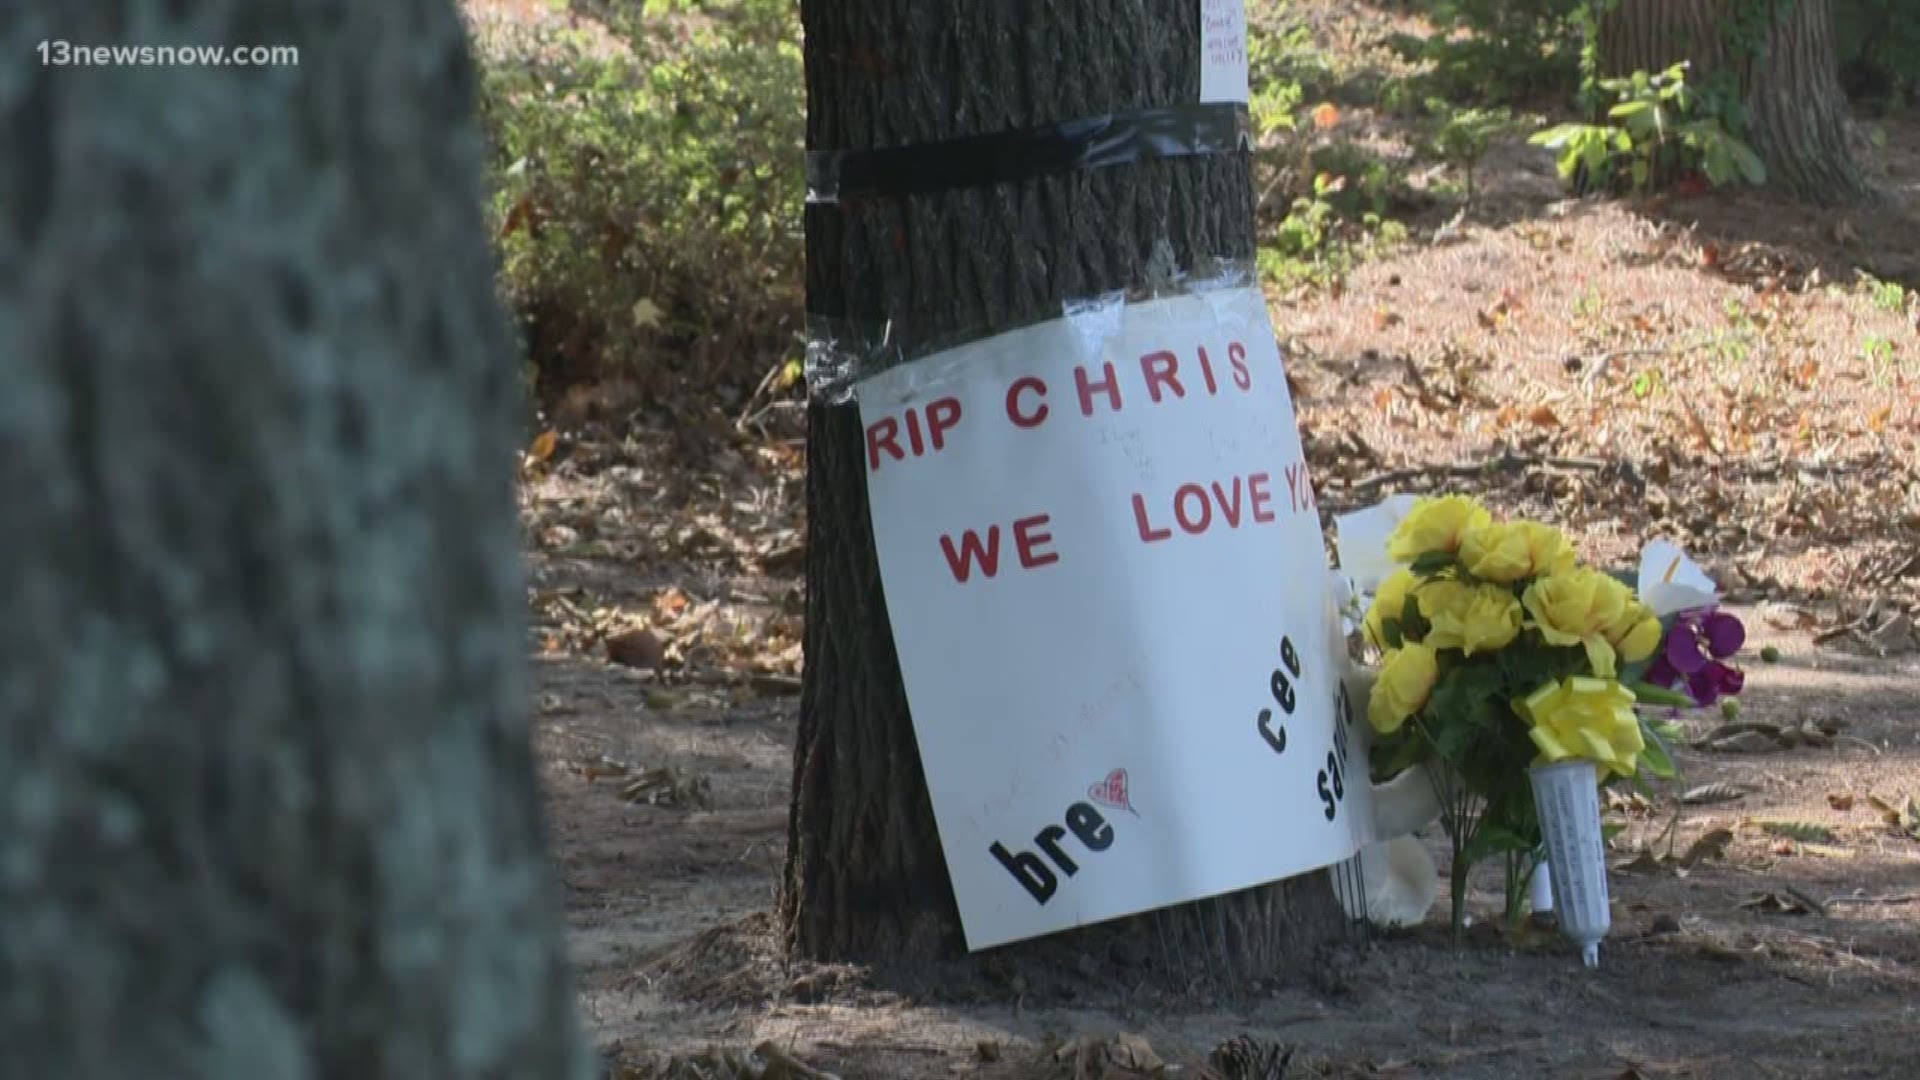 A tree has been covered with items to remember four people who died in the crash. A friend of the victims said she hung out with them just hours before the crash.